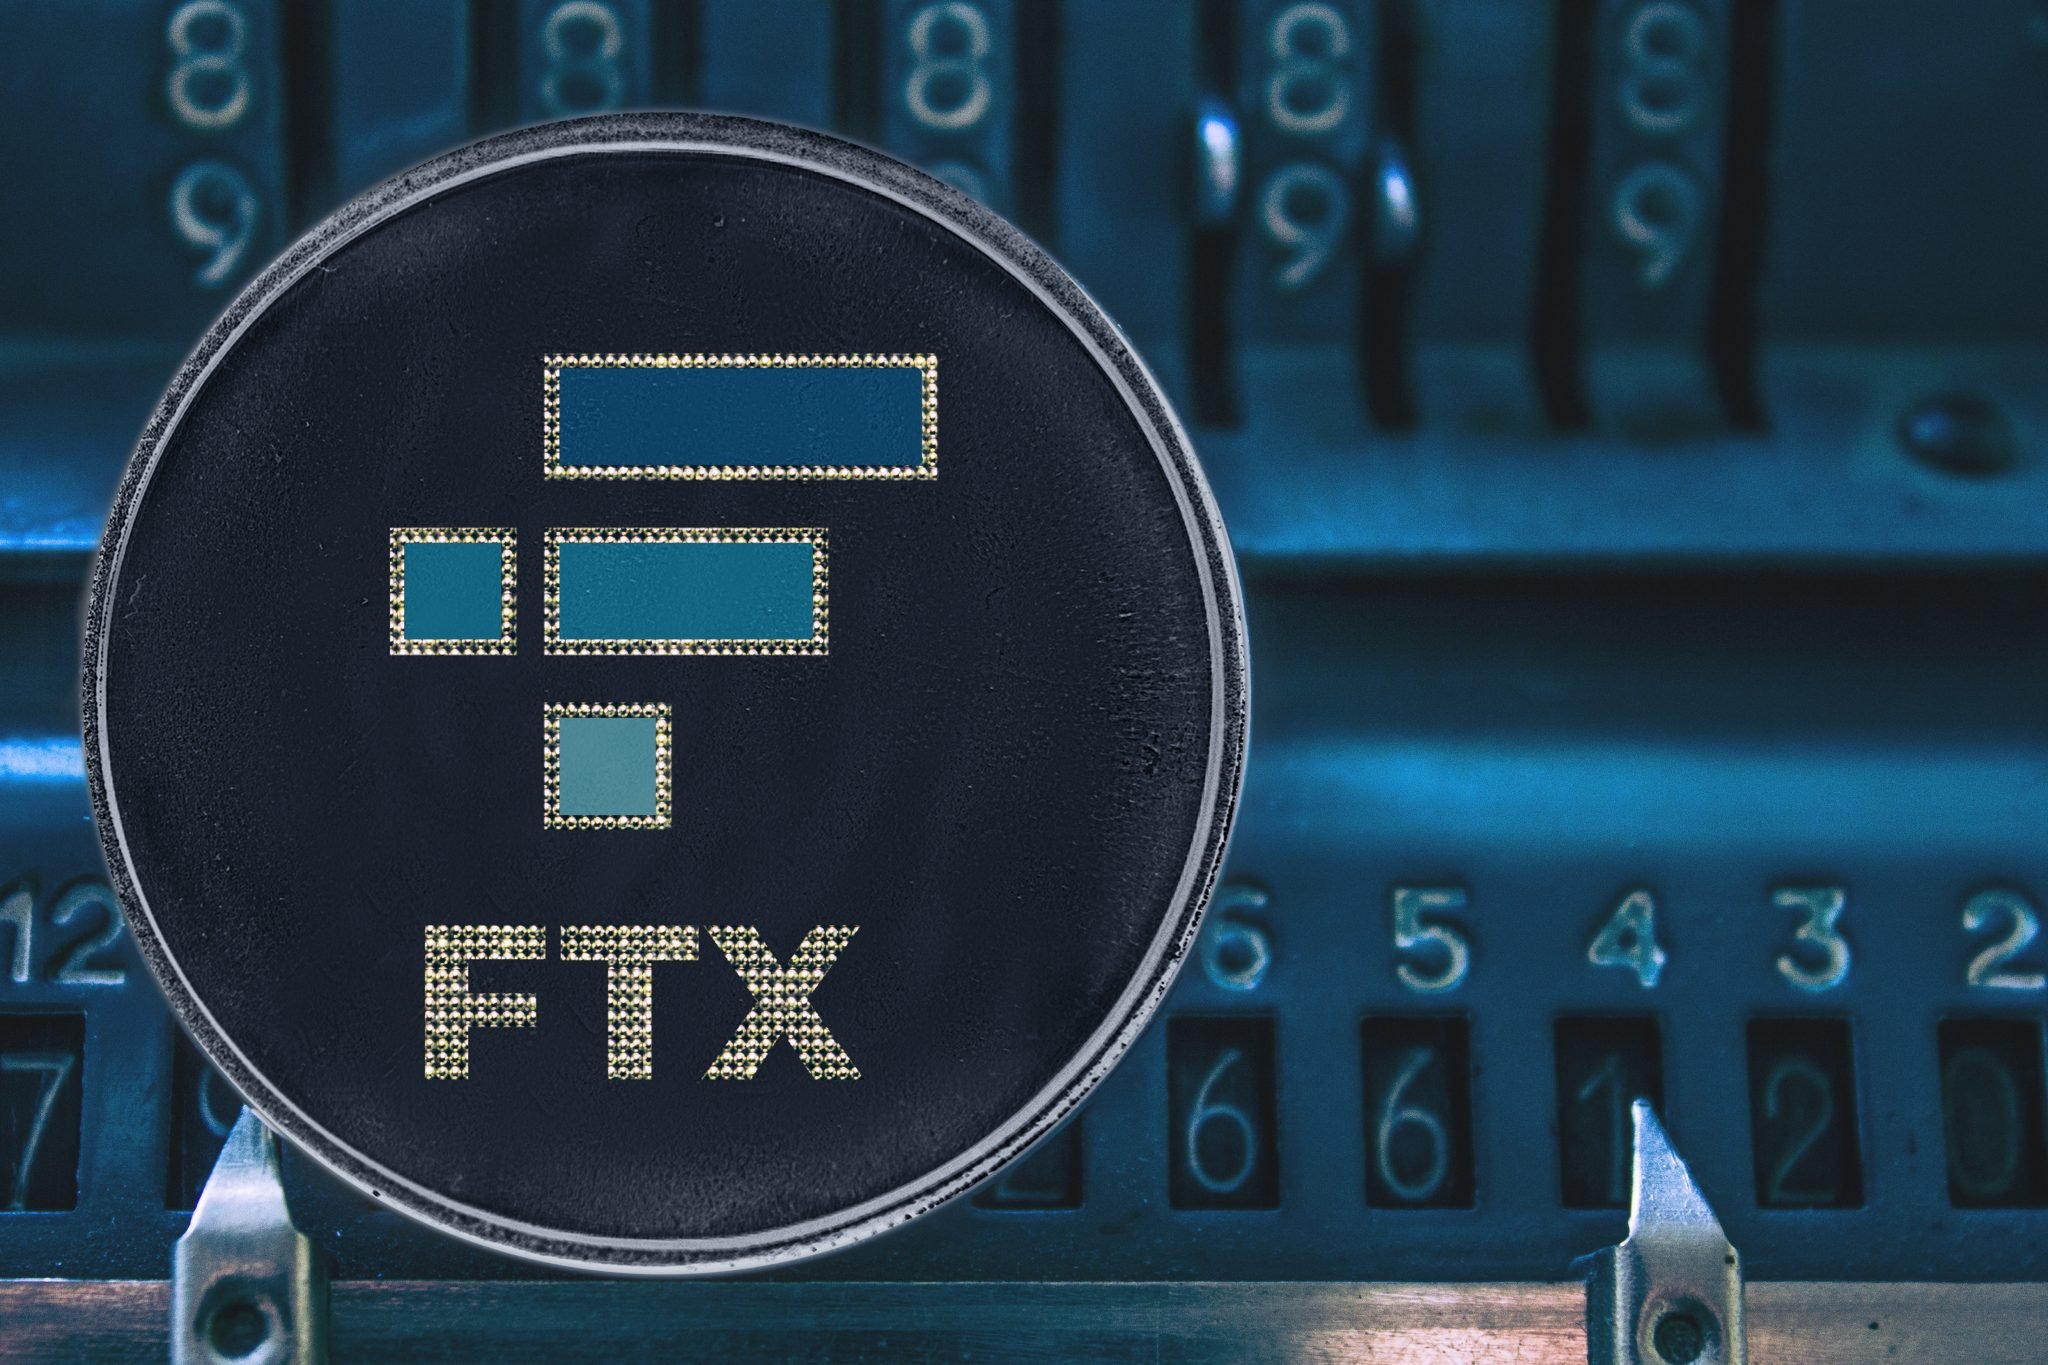 Coin cryptocurrency FTX against the numbers of the arithmometer.